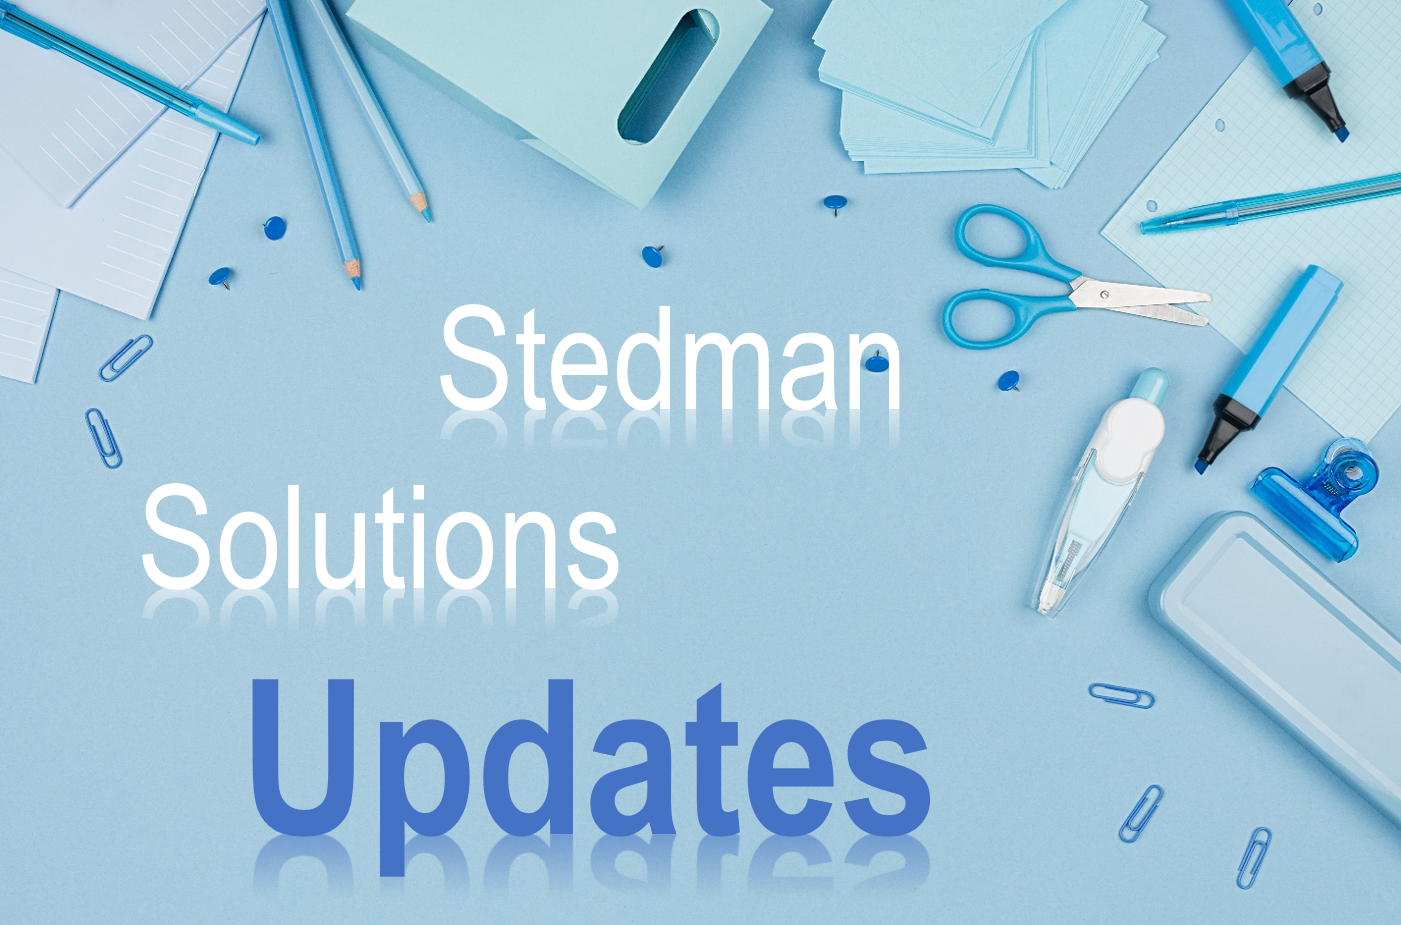 Latest Stedman Solutions business update: